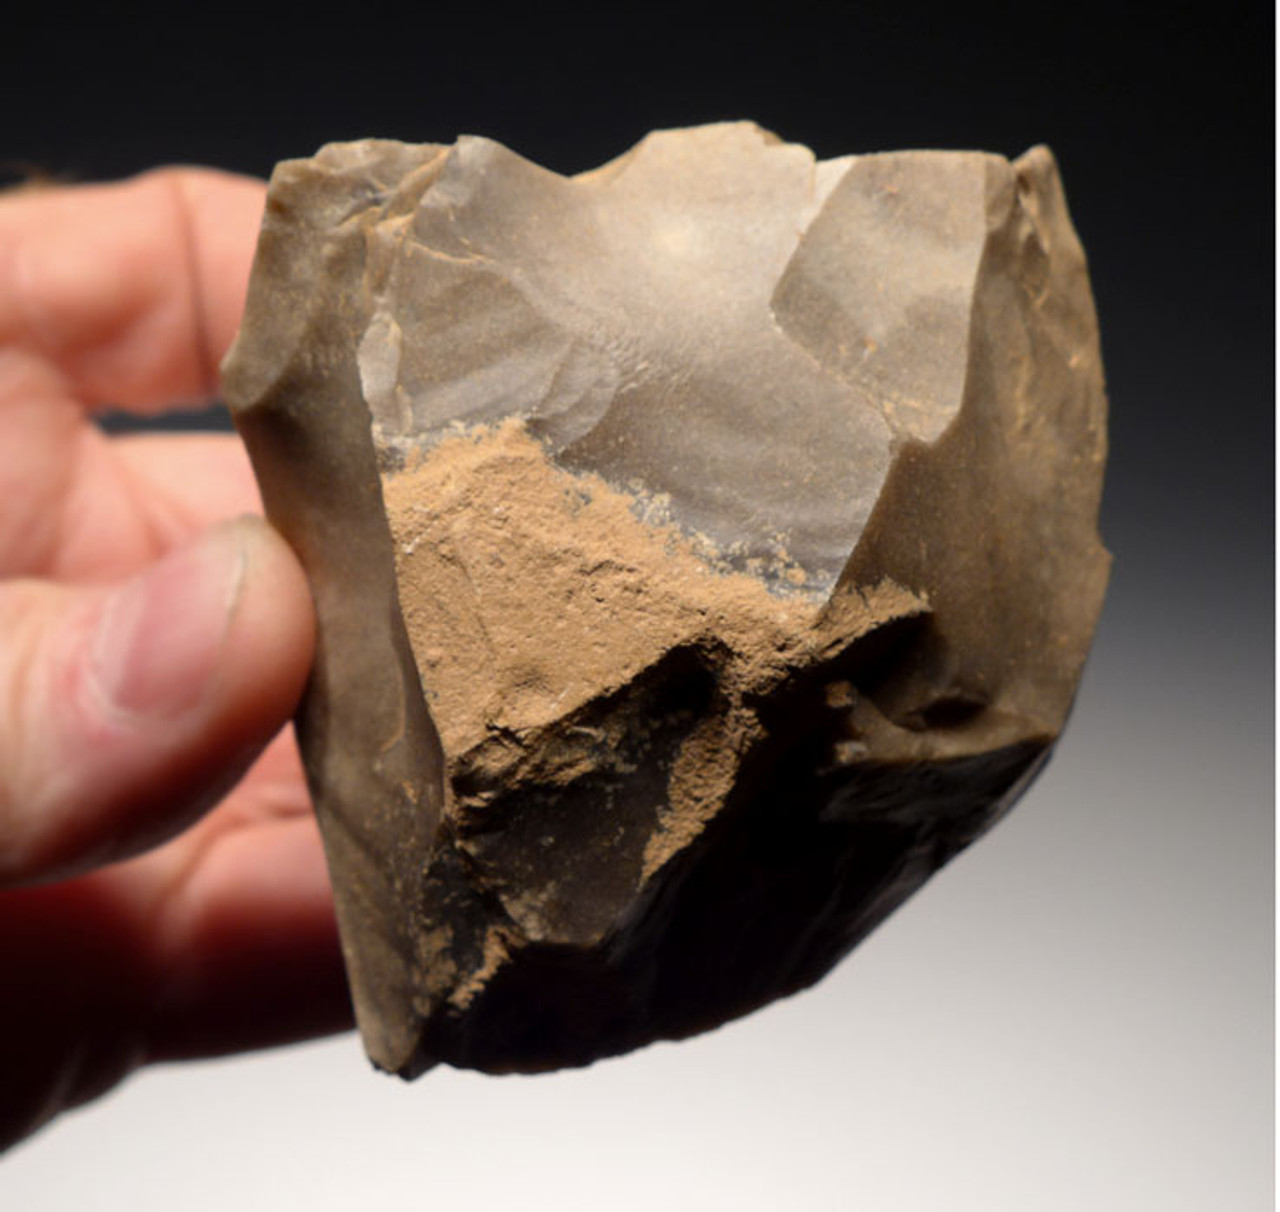 M325 - UPPER PALEOLITHIC FLINT FLAKE TOOL CORE BY CRO-MAGNON HUMANS FROM THE DORDOGNE OF FRANCE